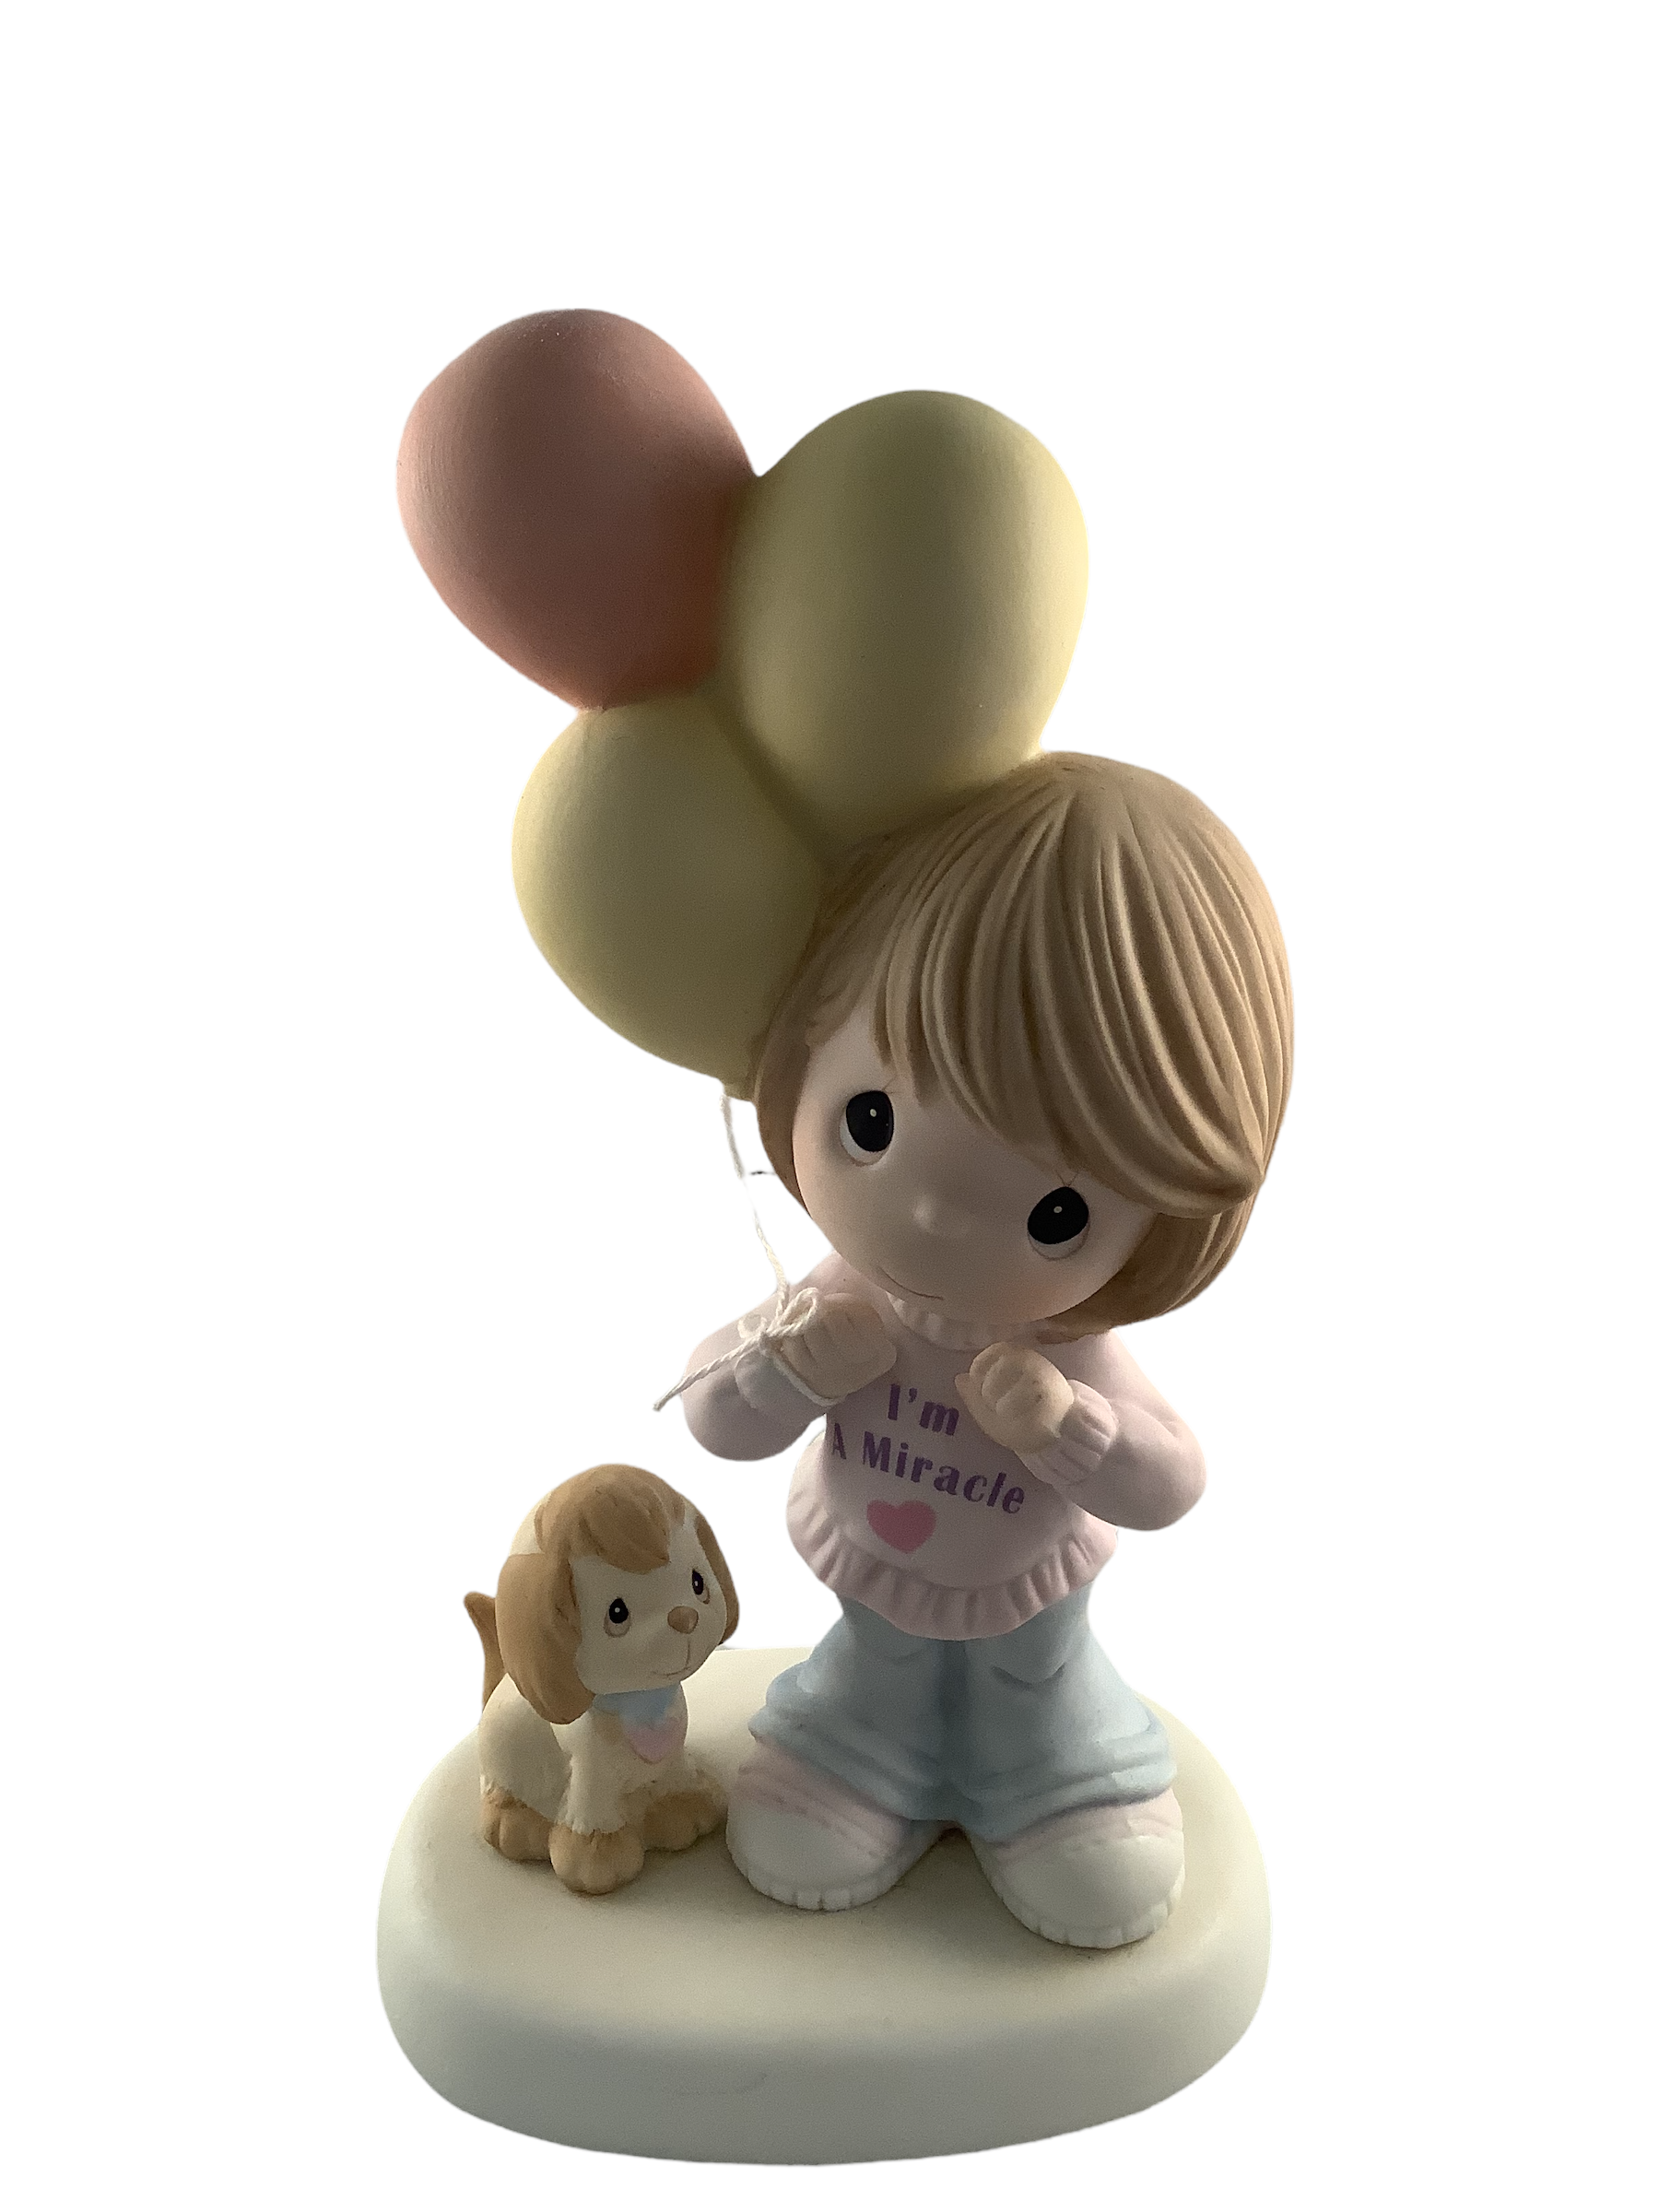 You Are A Miracle - Precious Moment Figurine